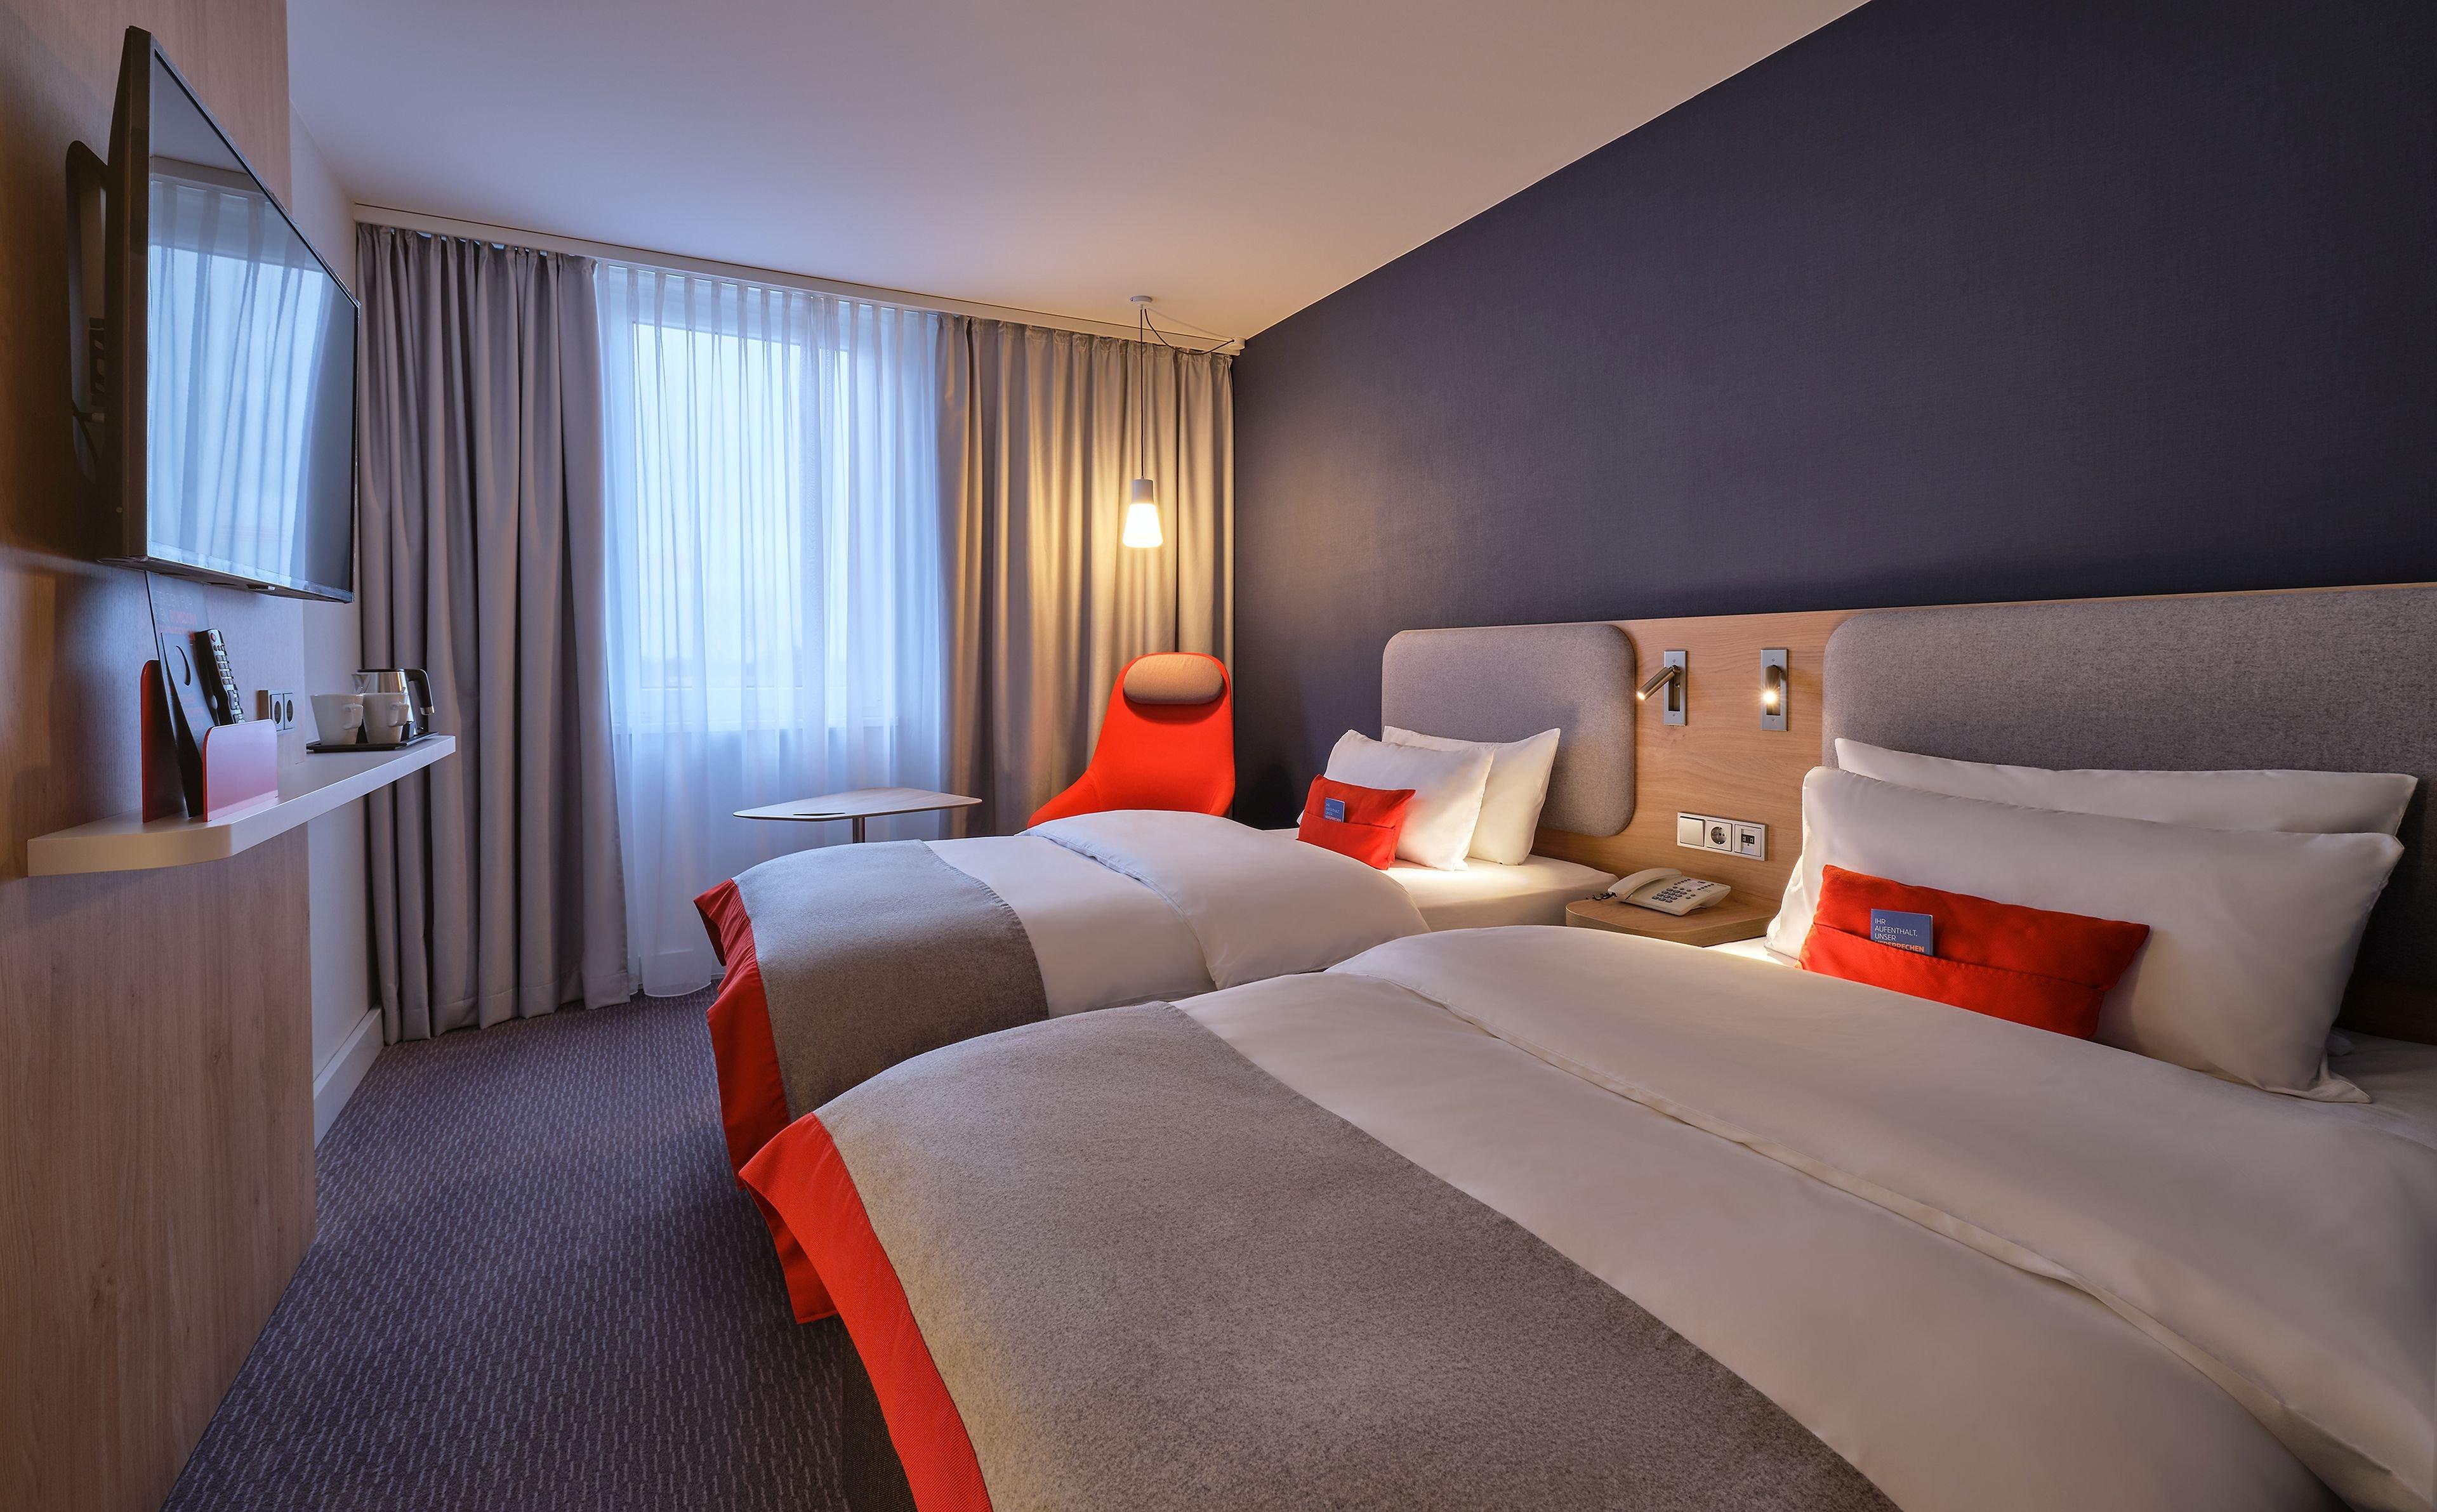 Ideal for sharing - our twin bedded rooms